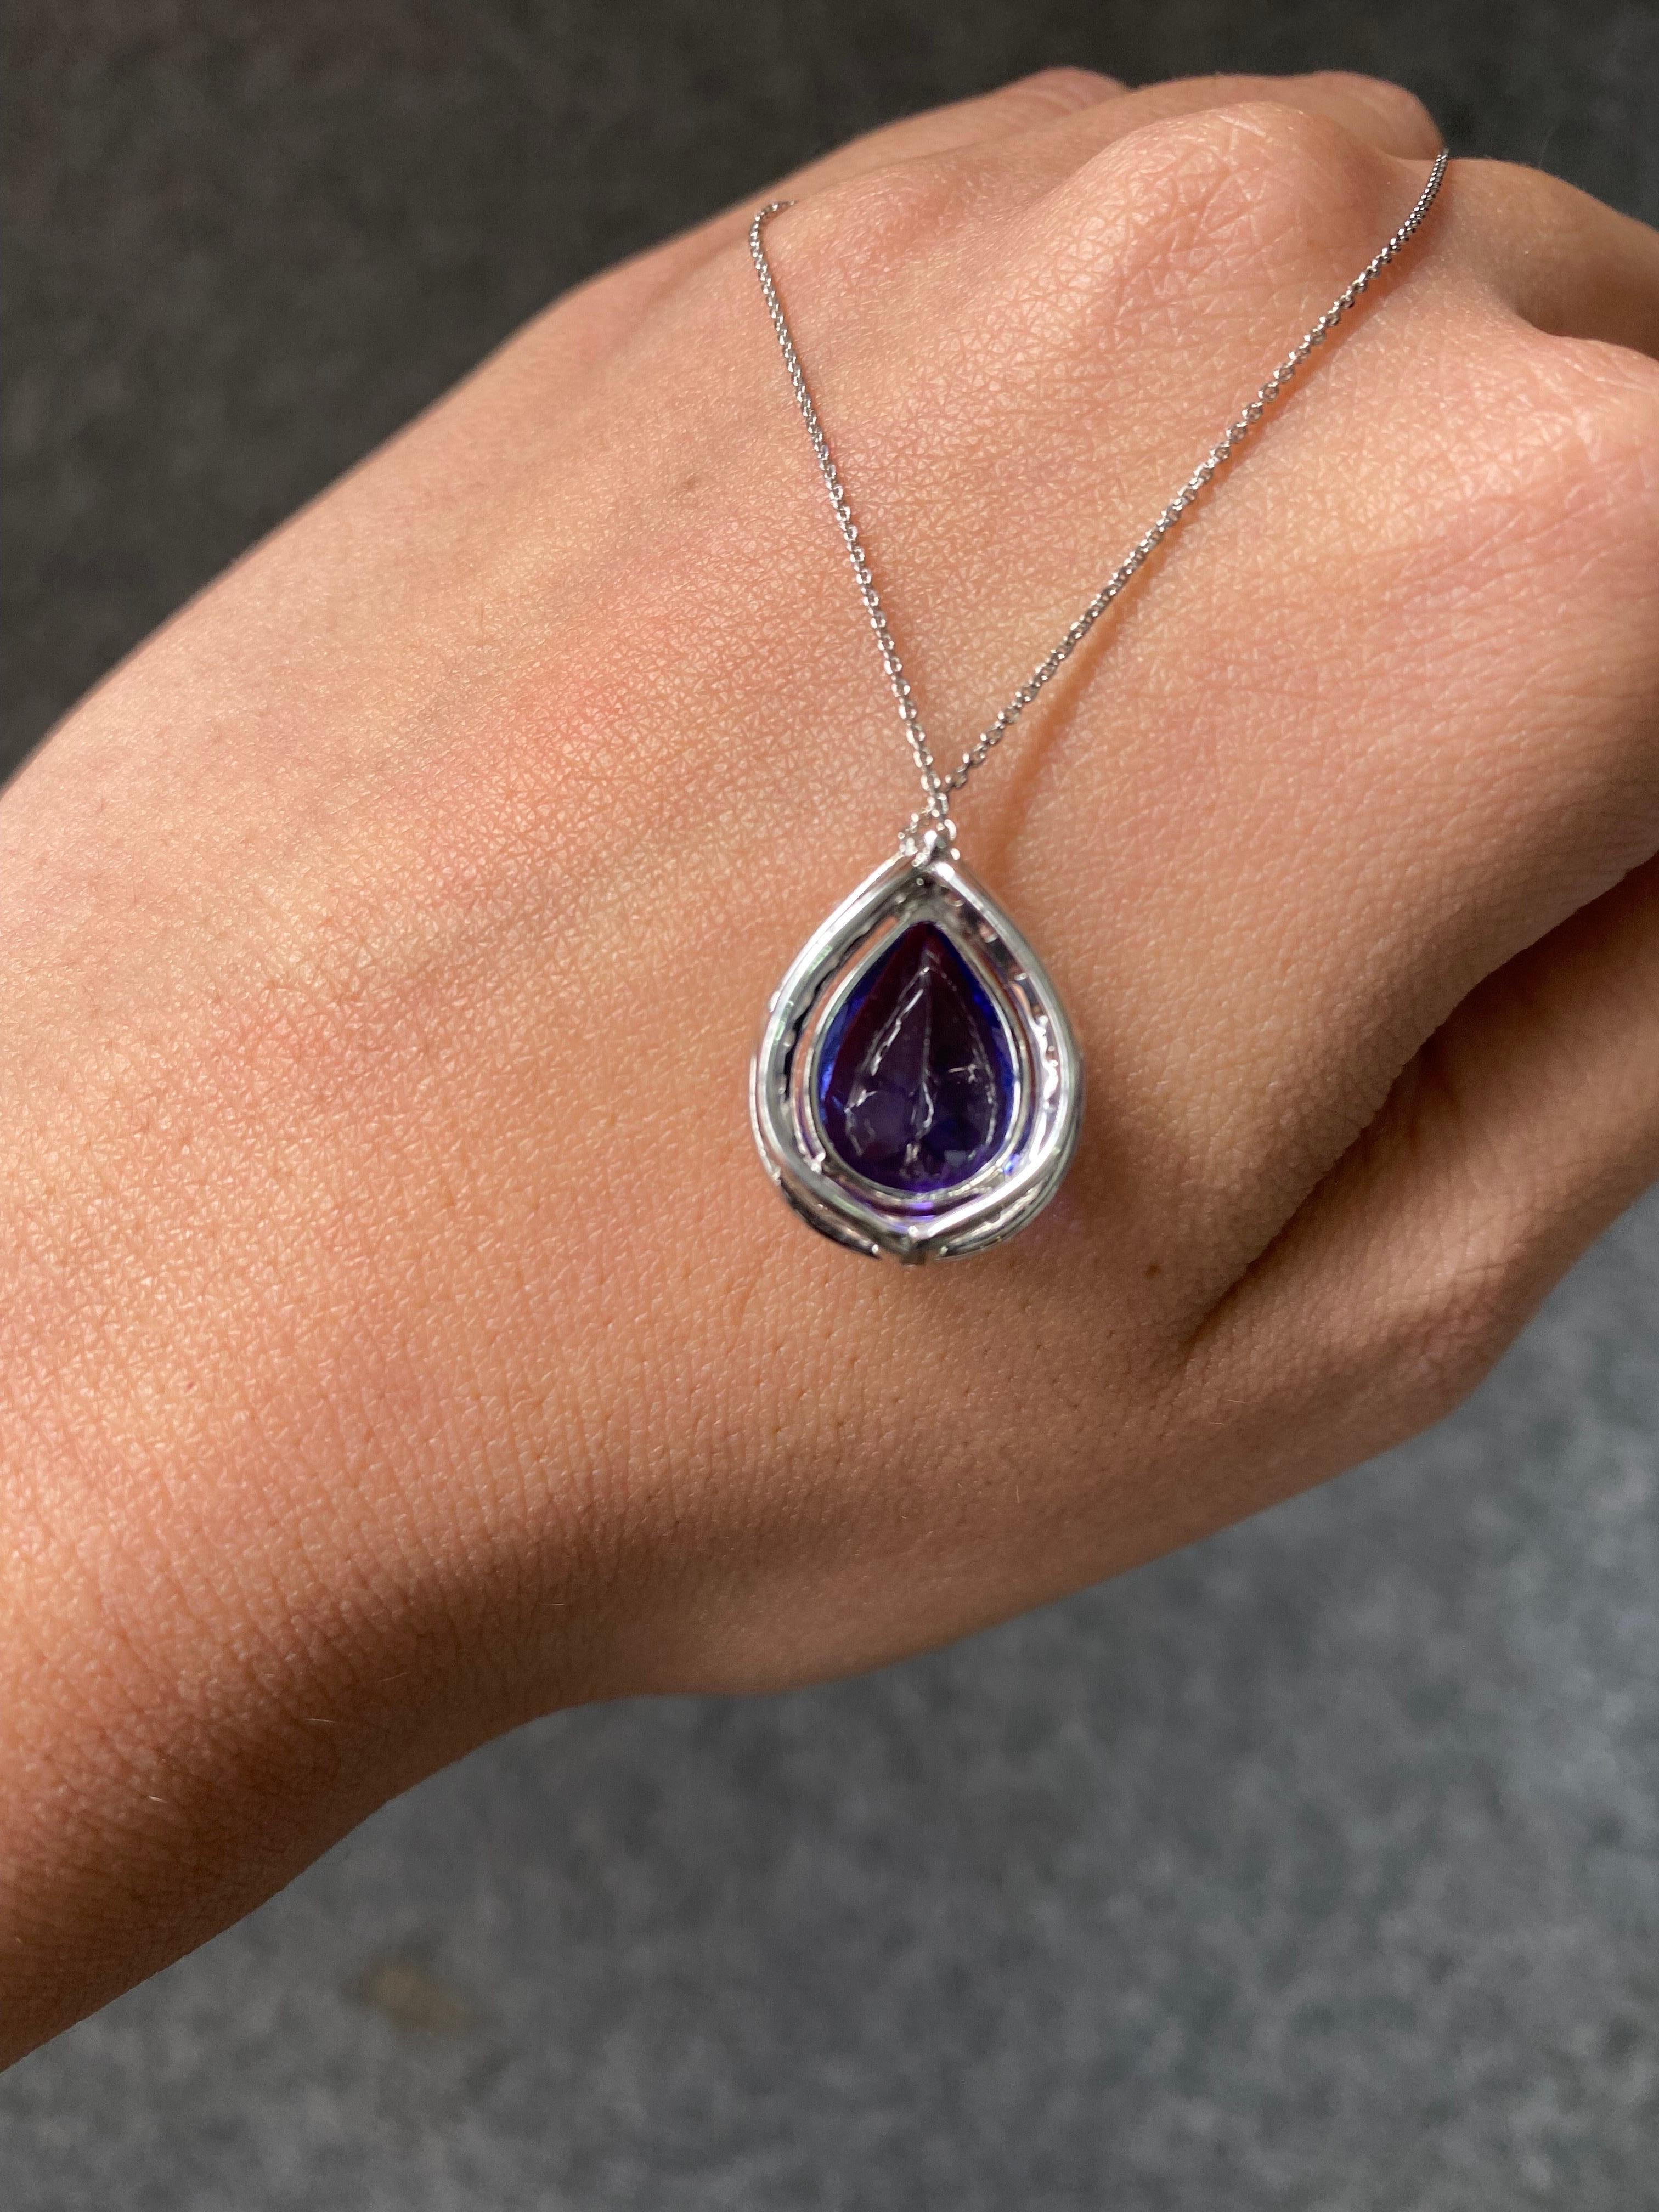 An elegant 5.63 carat natural pear shape Tanzanite pendant, with an ideal blue color,  AAA quality stone. The centre stone has no inclusions, and is absolutely transparent with great luster. The VS quality diamonds and Tanzanite are set in solid 18K